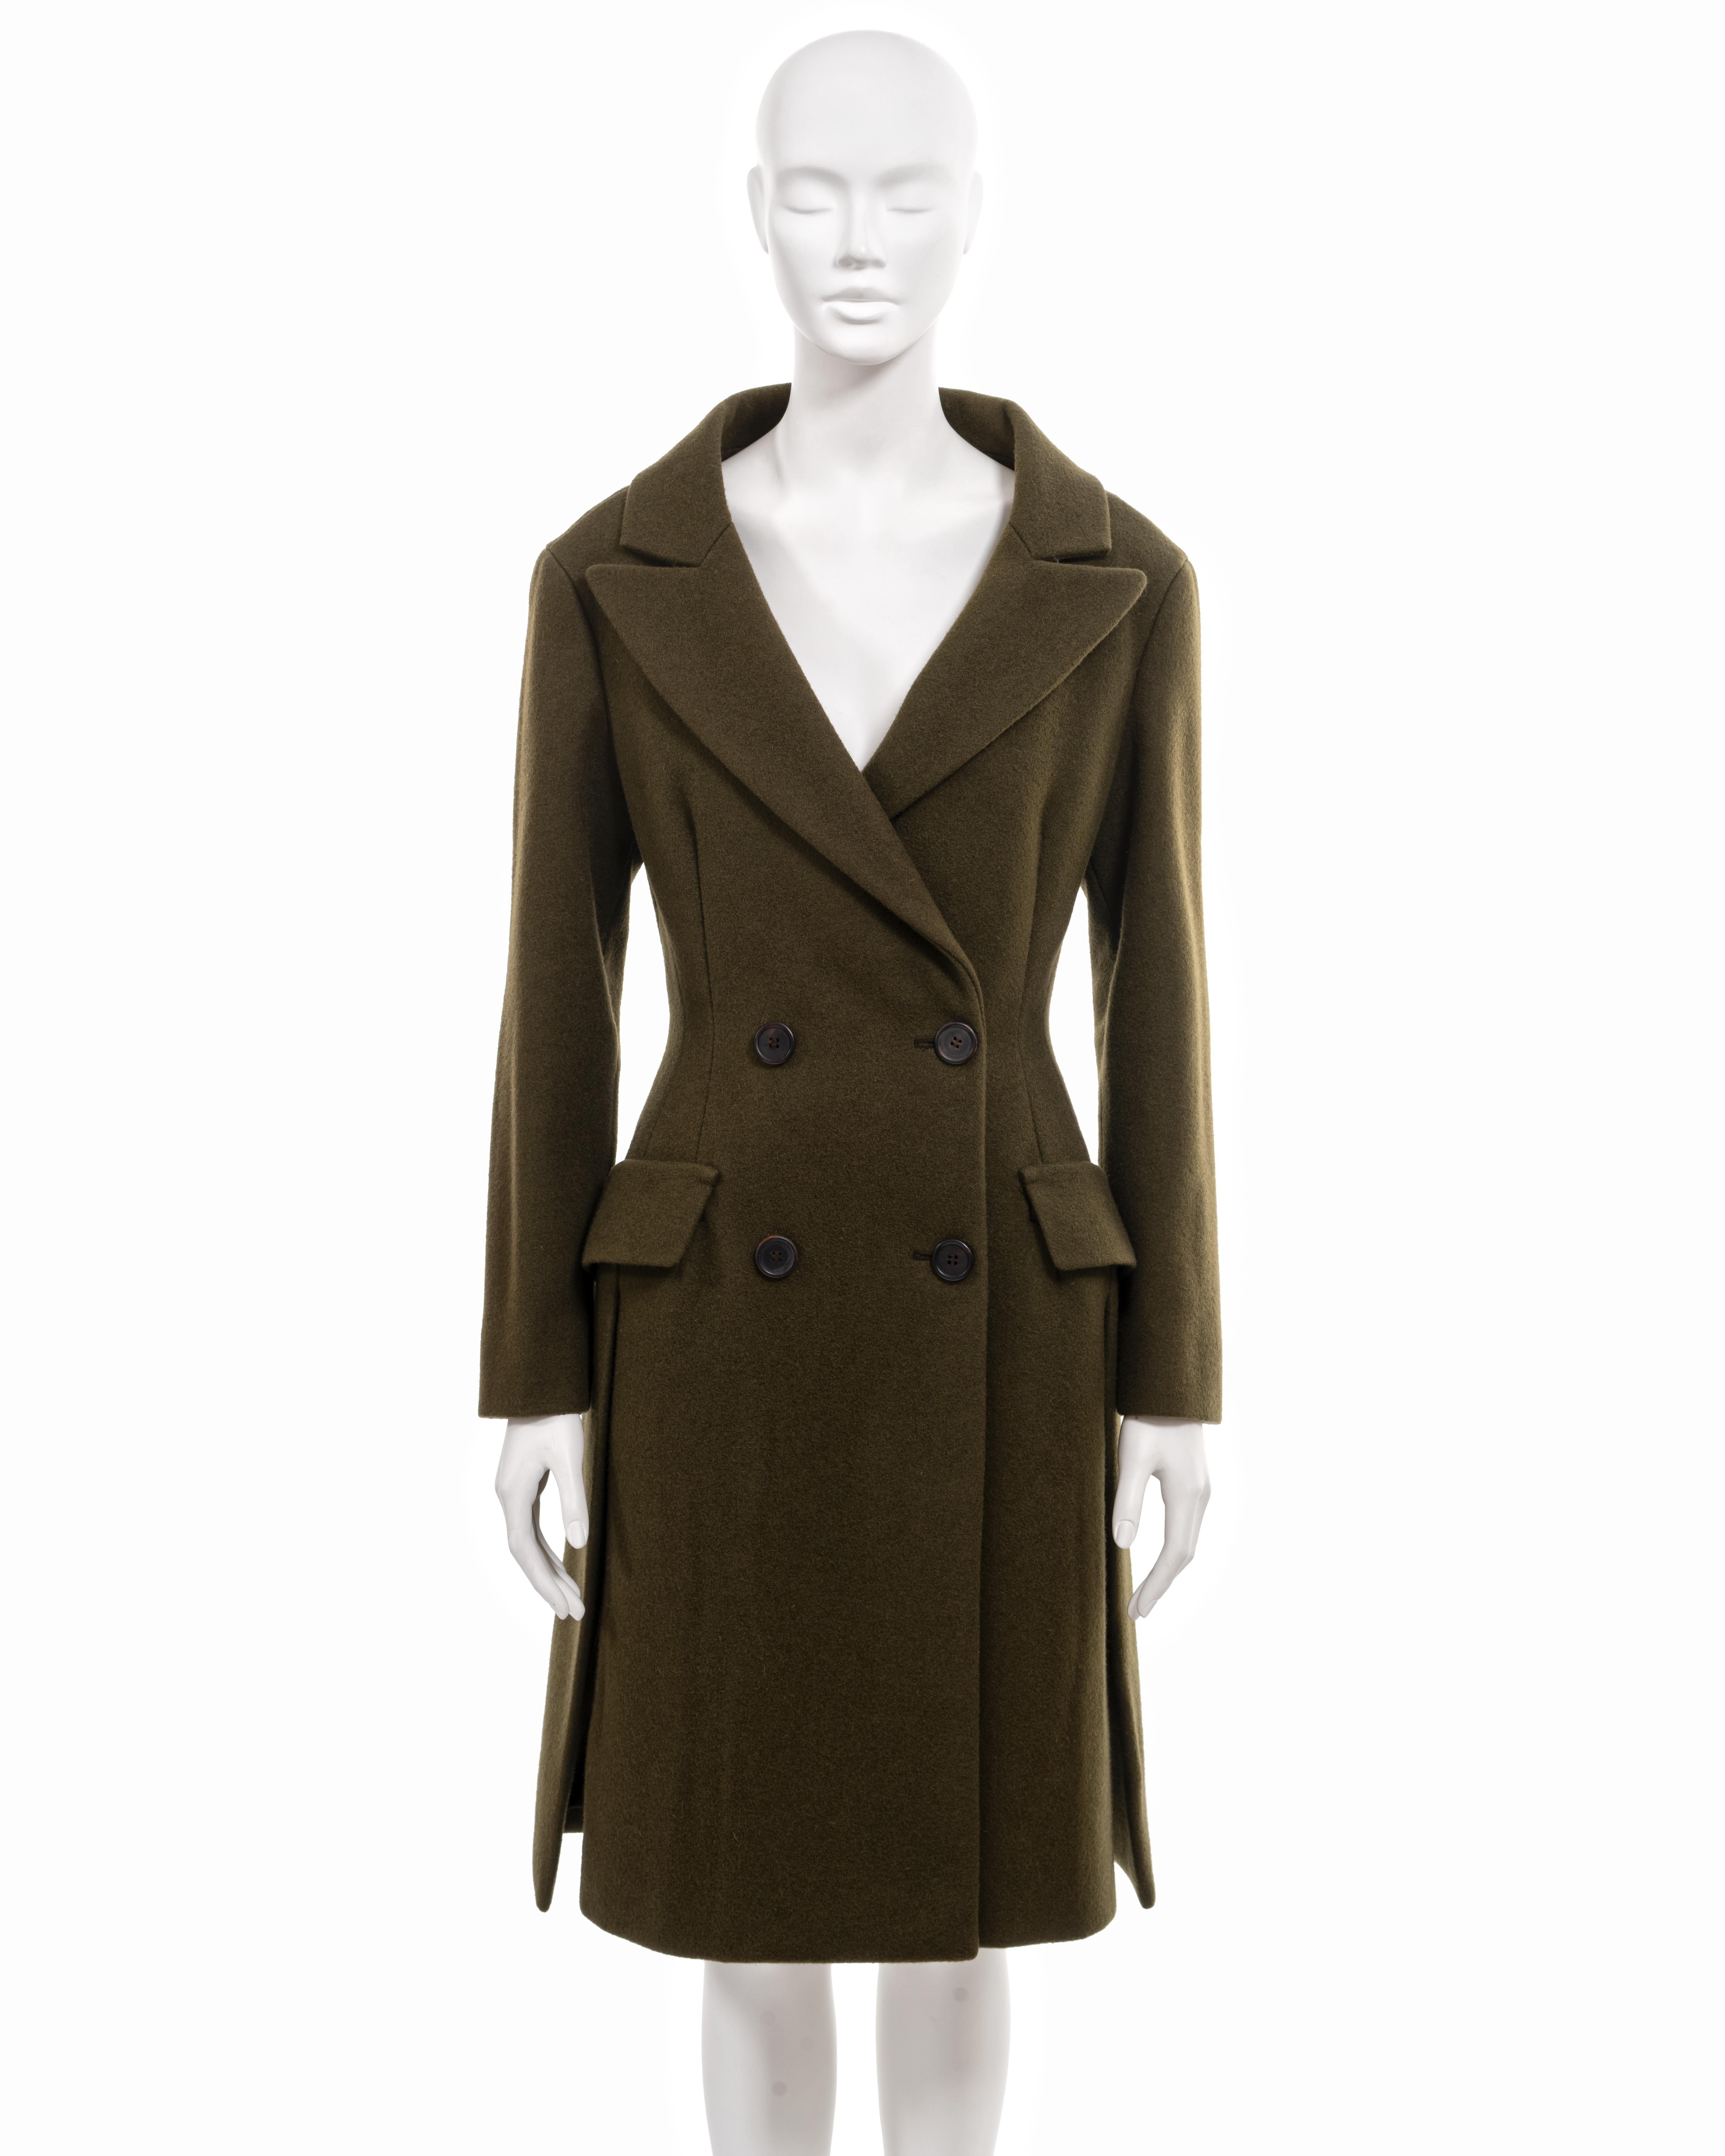 ▪ Prada archival coat
▪ Creative Director: Miuccia Prada 
▪ Sold by One of a Kind Archive
▪ Constructed from high-quality olive green melton wool 
▪ Stand-away collar with peak lapels 
▪ Multiple vertical darts accentuate the waist 
▪